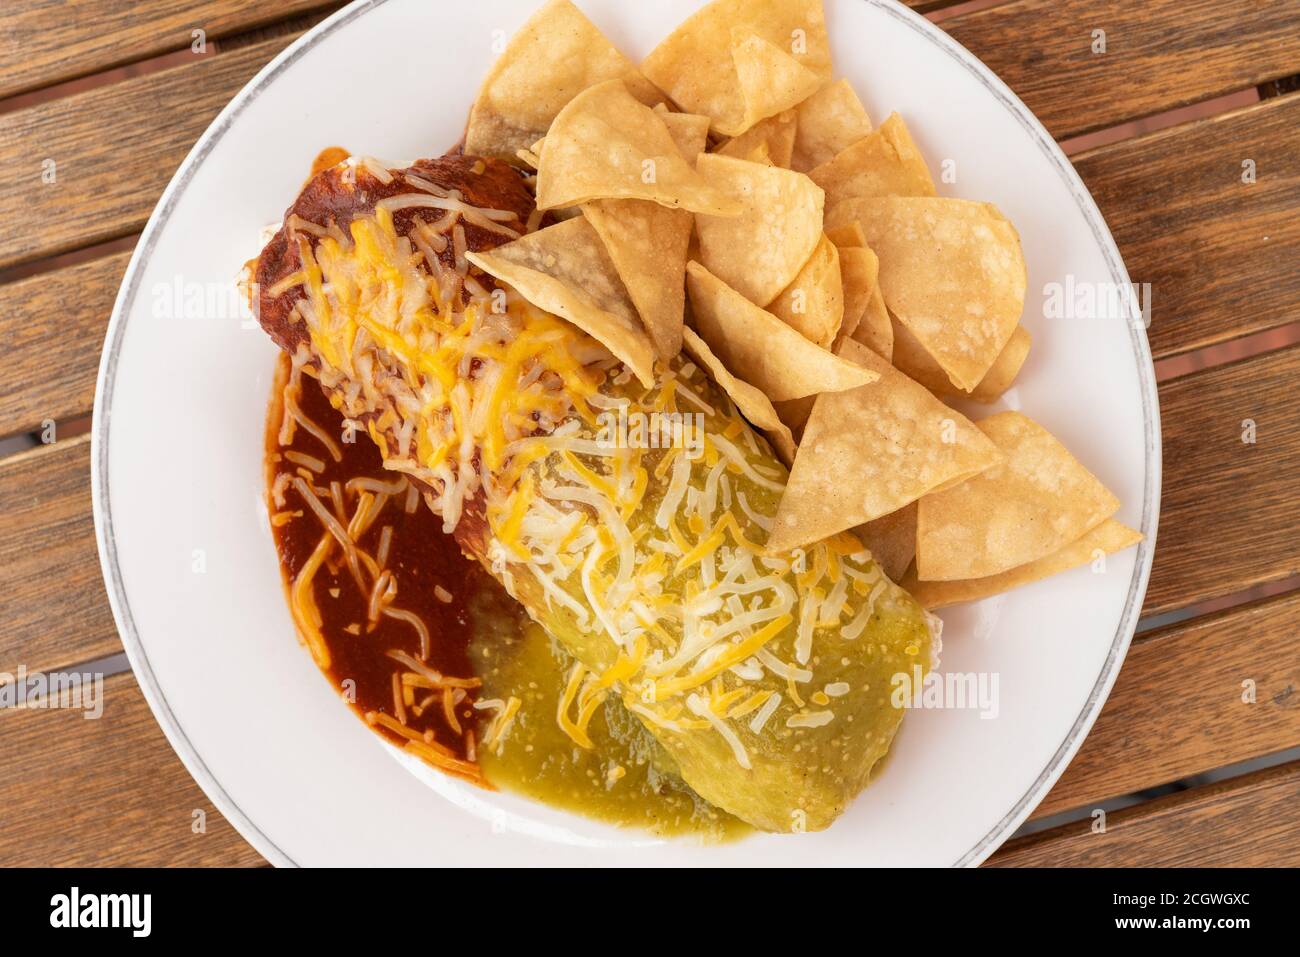 Breakfast burrito covered in cheese and sauce served with chips on the side makes a great meal. Stock Photo